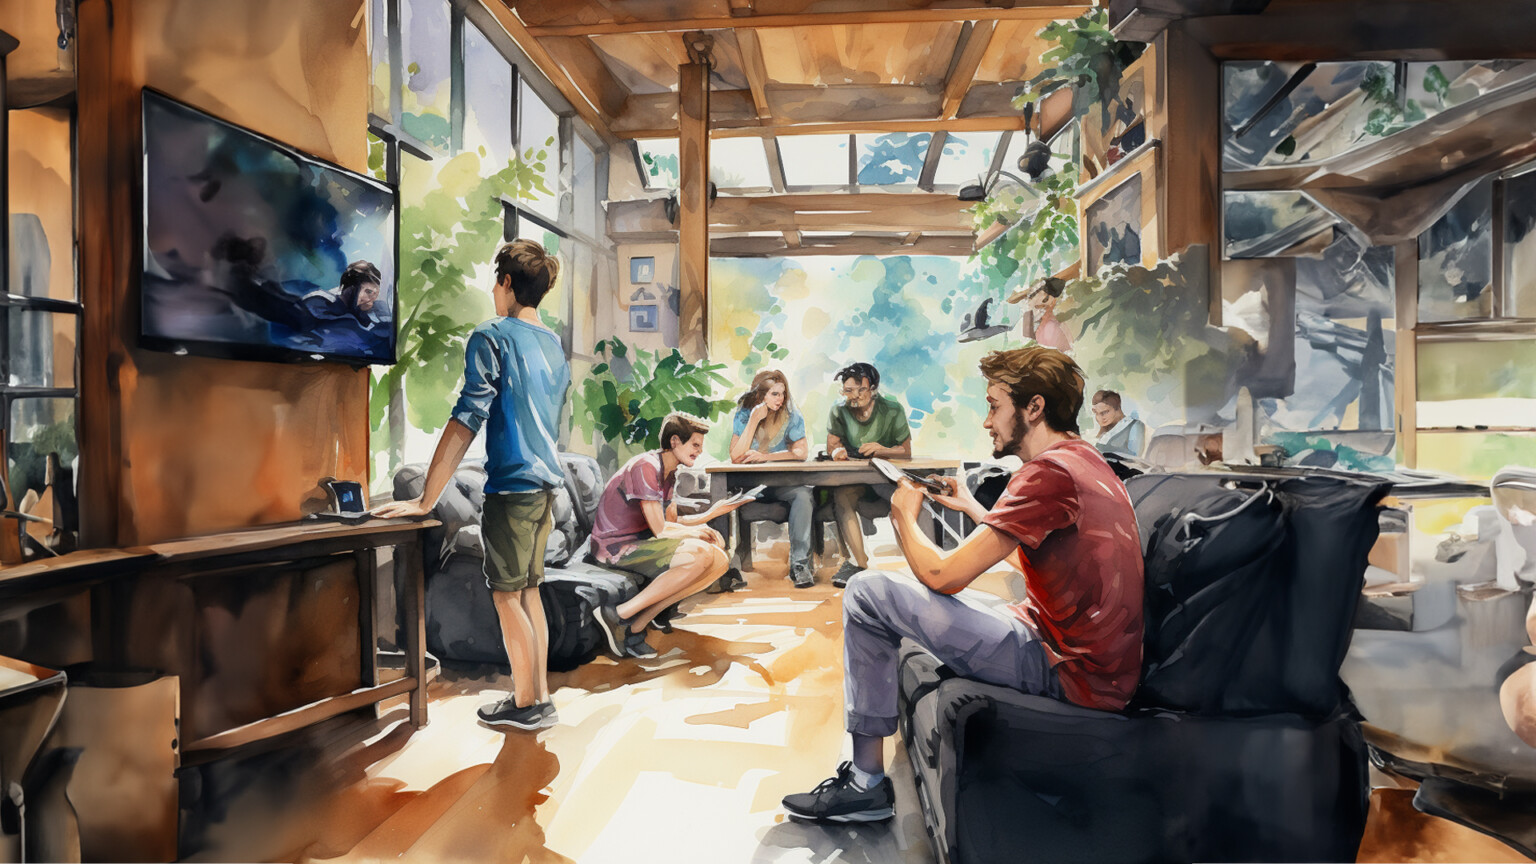 AI generated image of teens gathered in a cozy space watching TV, using smartphones, and engaging in conversation.